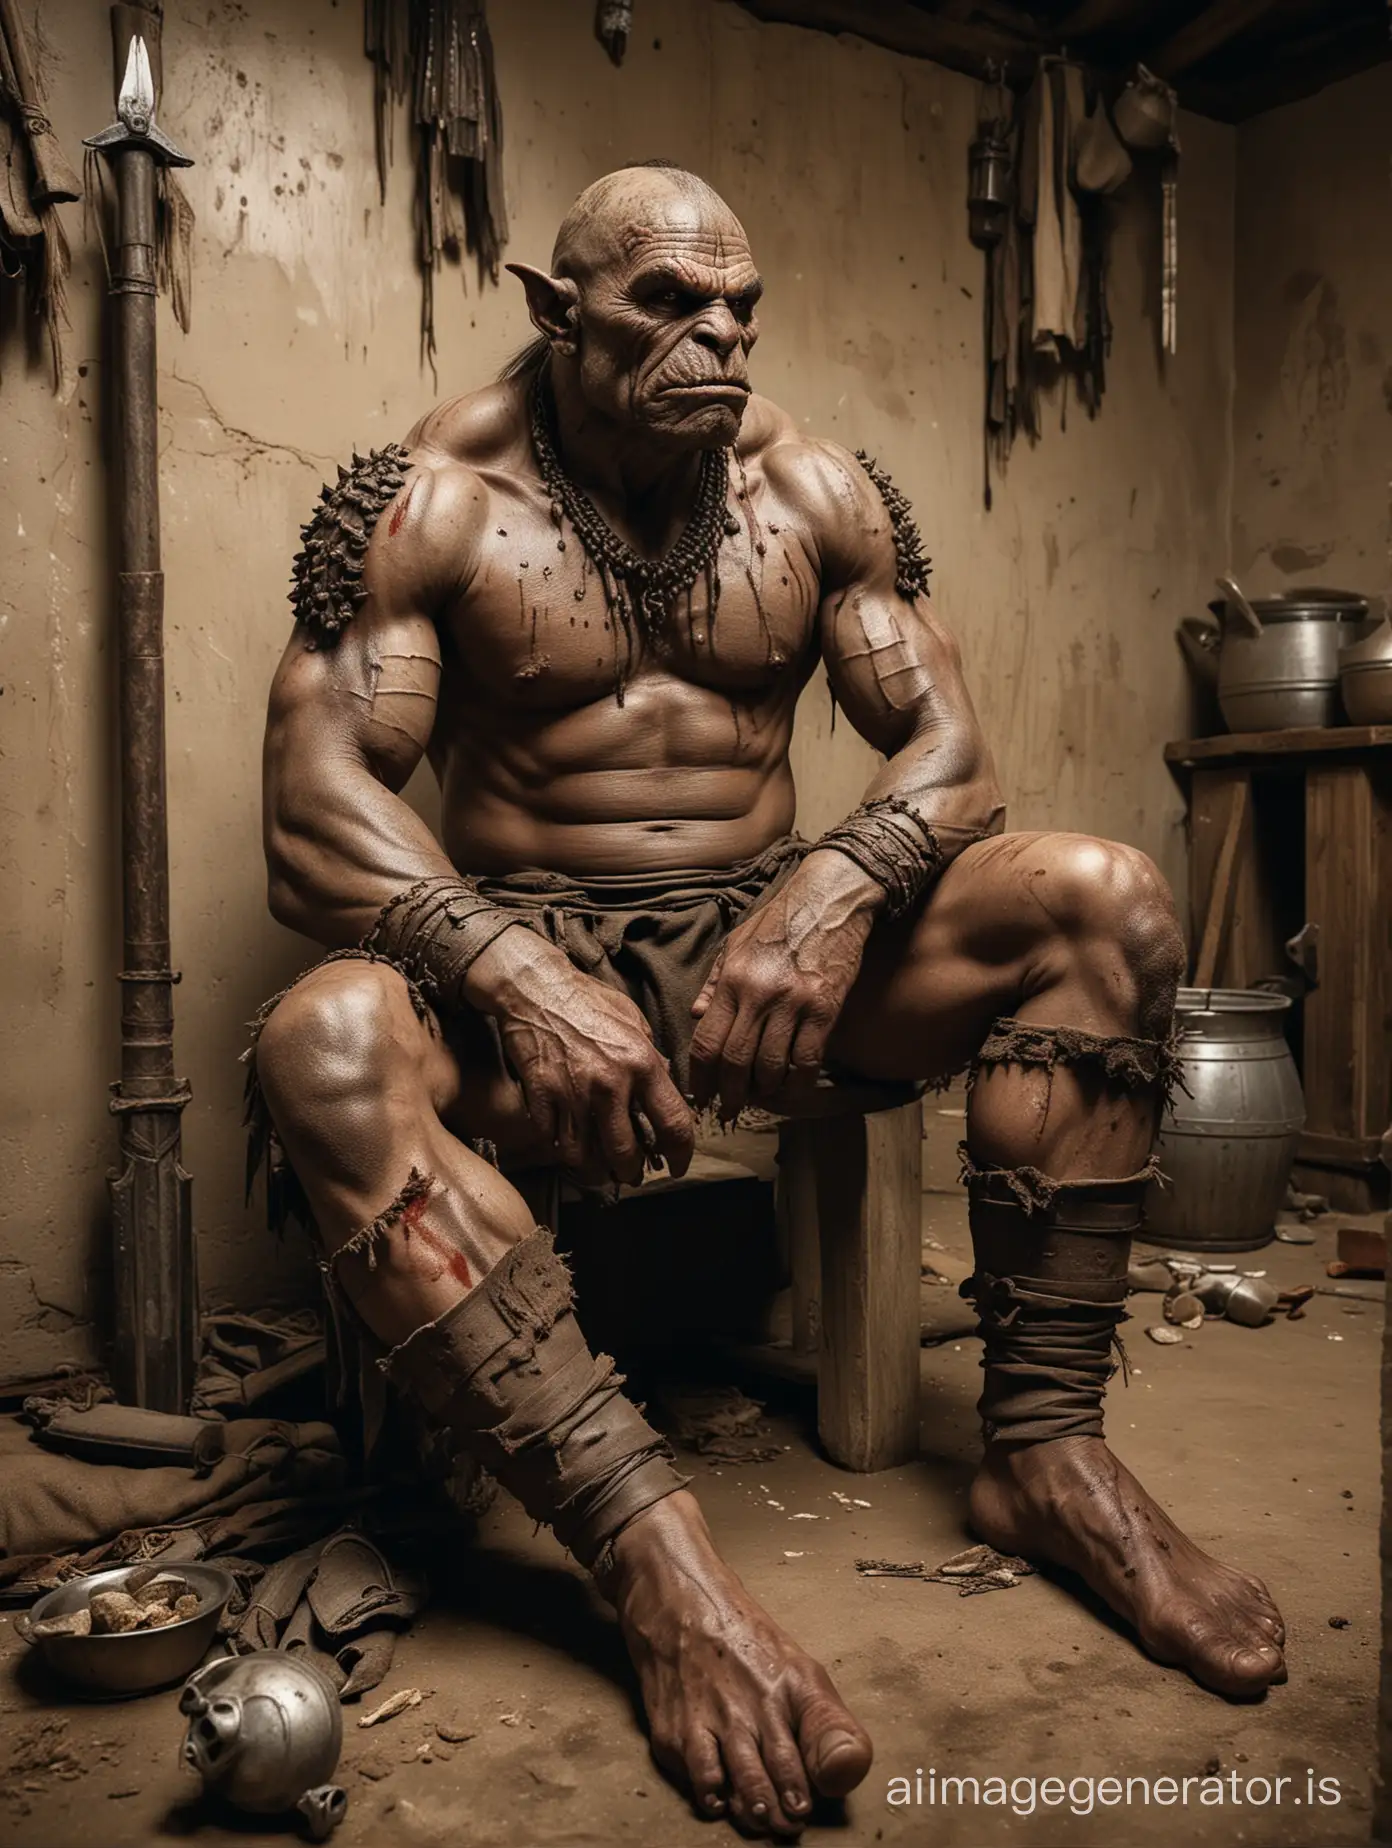 Contemplative-Orc-Chieftain-Amidst-Trophies-and-Grit